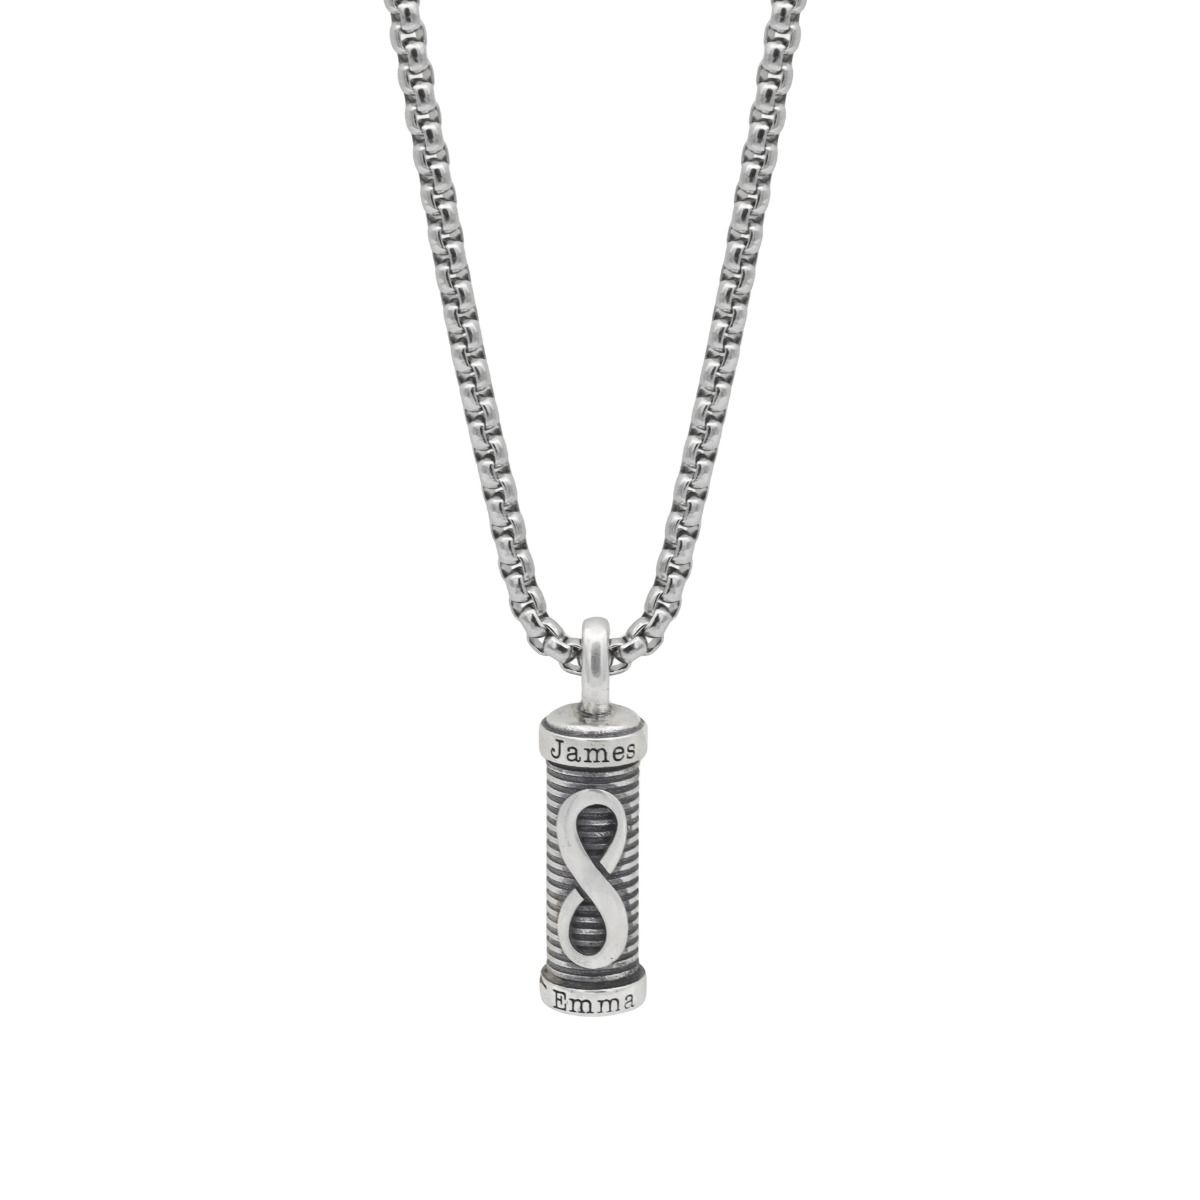 Hexa Bar Name Necklace for Men - Sterling Silver / Black Cord by Talisa